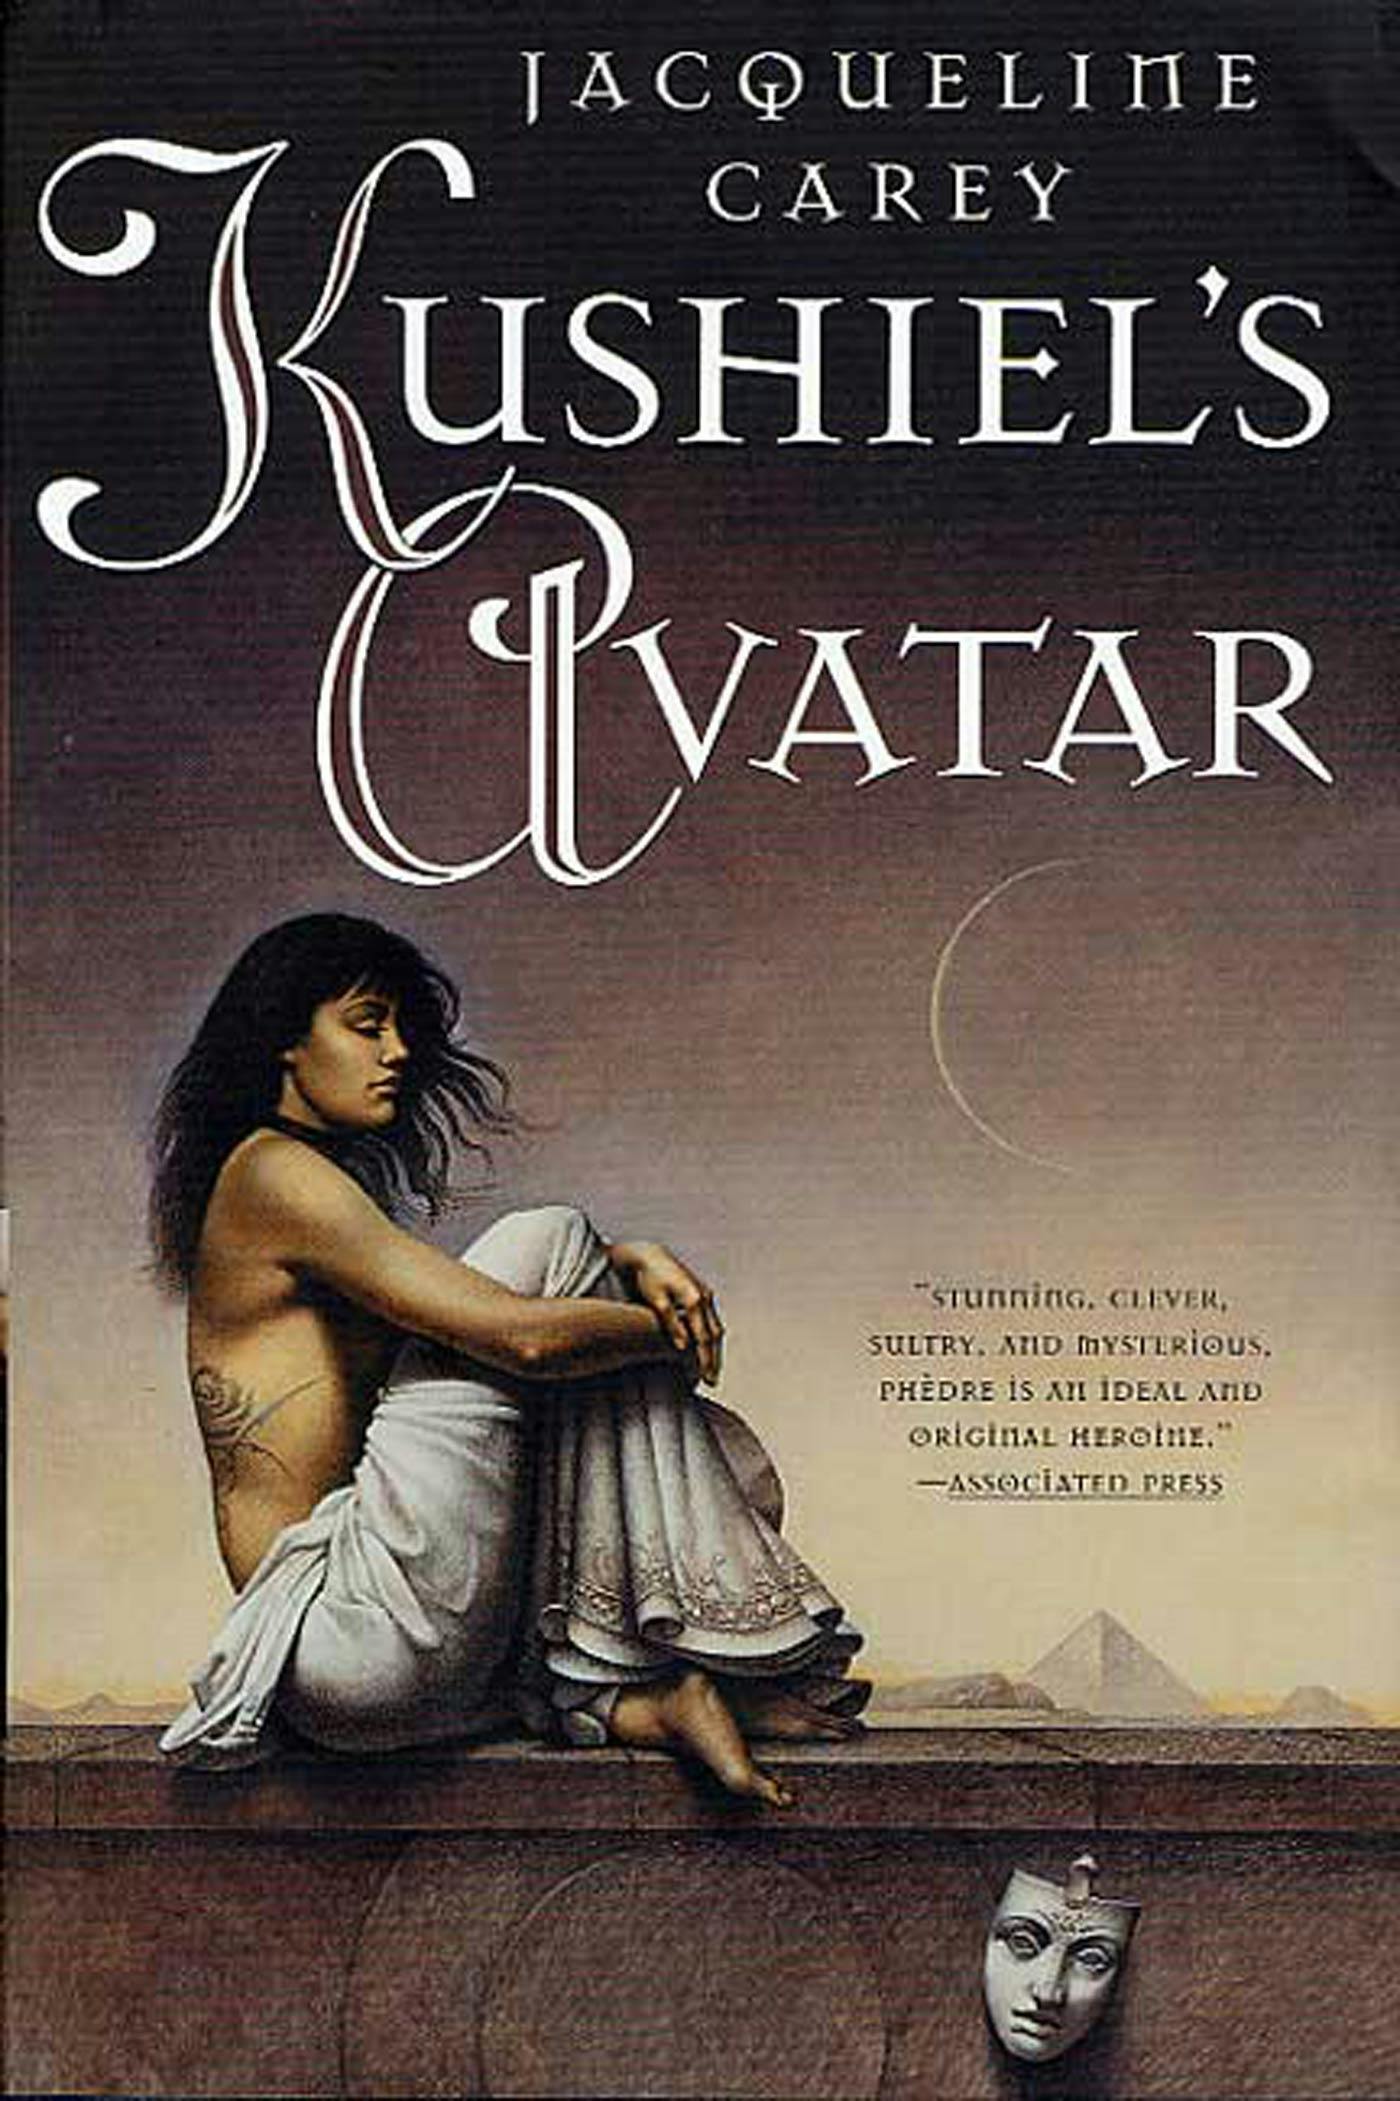 Cover for the book titled as: Kushiel's Avatar